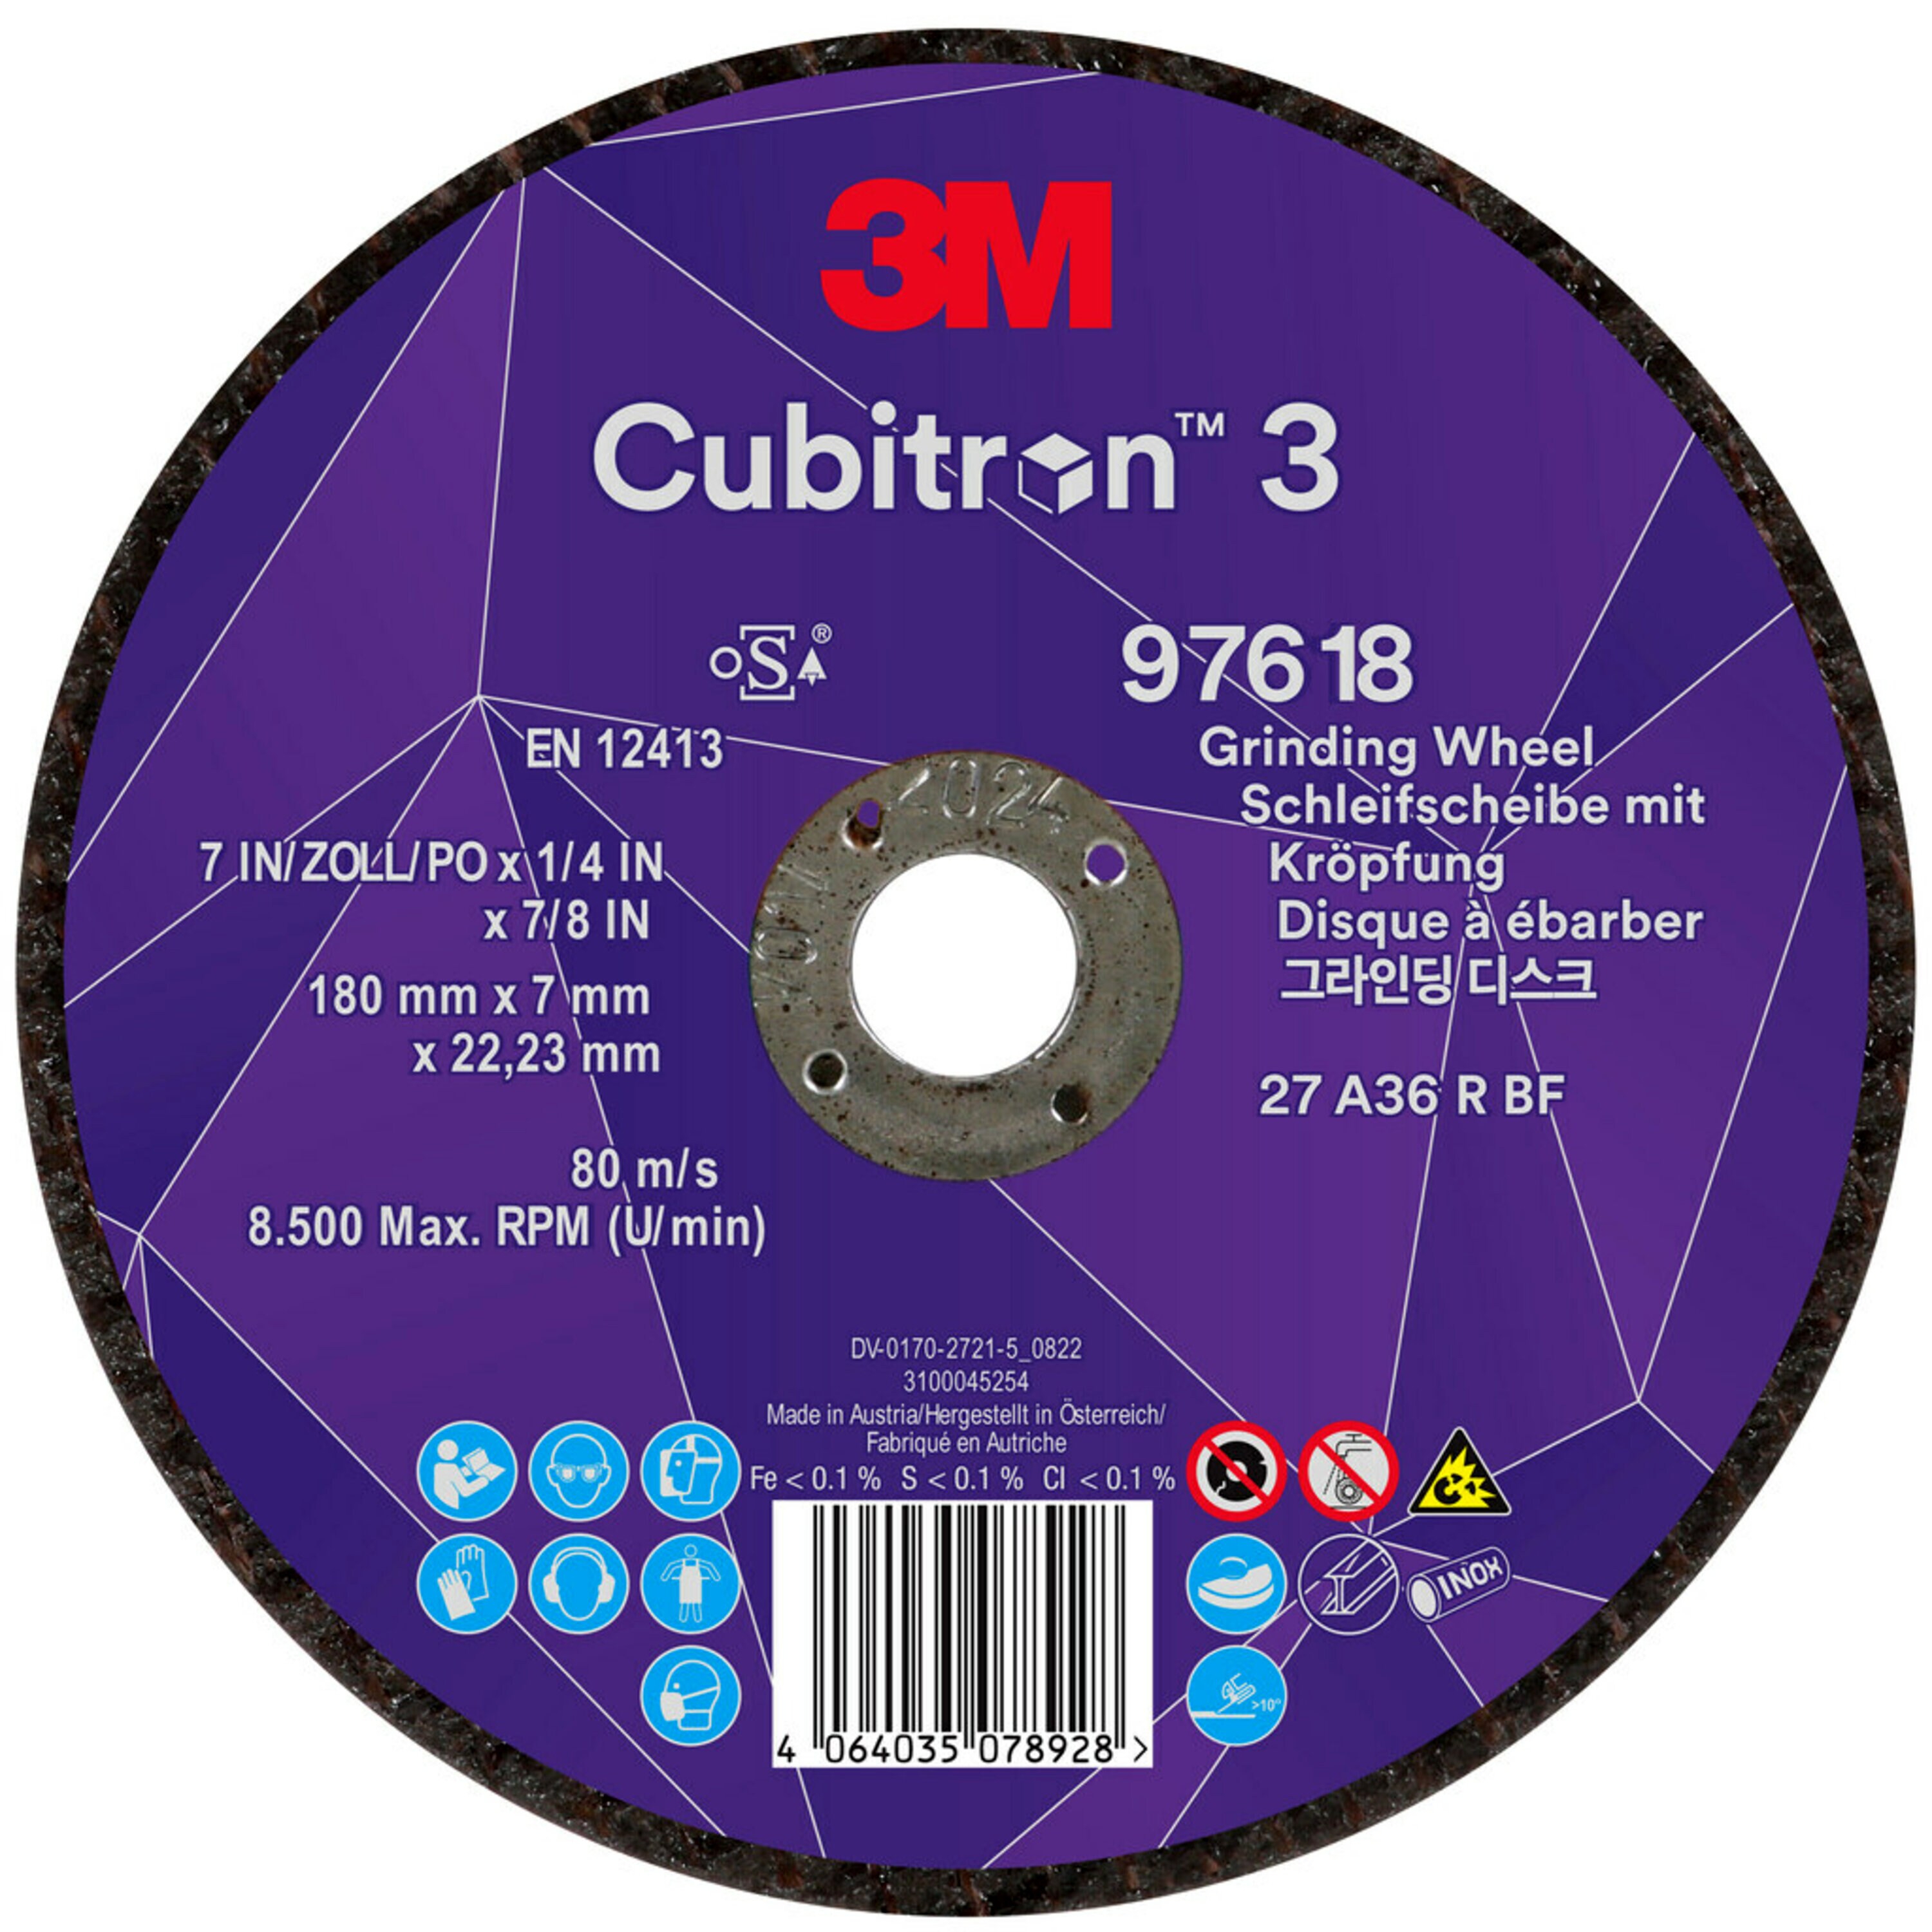 3M Cubitron 3 grinding disc, 180 mm, 7.0 mm, 22.23 mm, 36 , type 27, especially for gouging # 97618